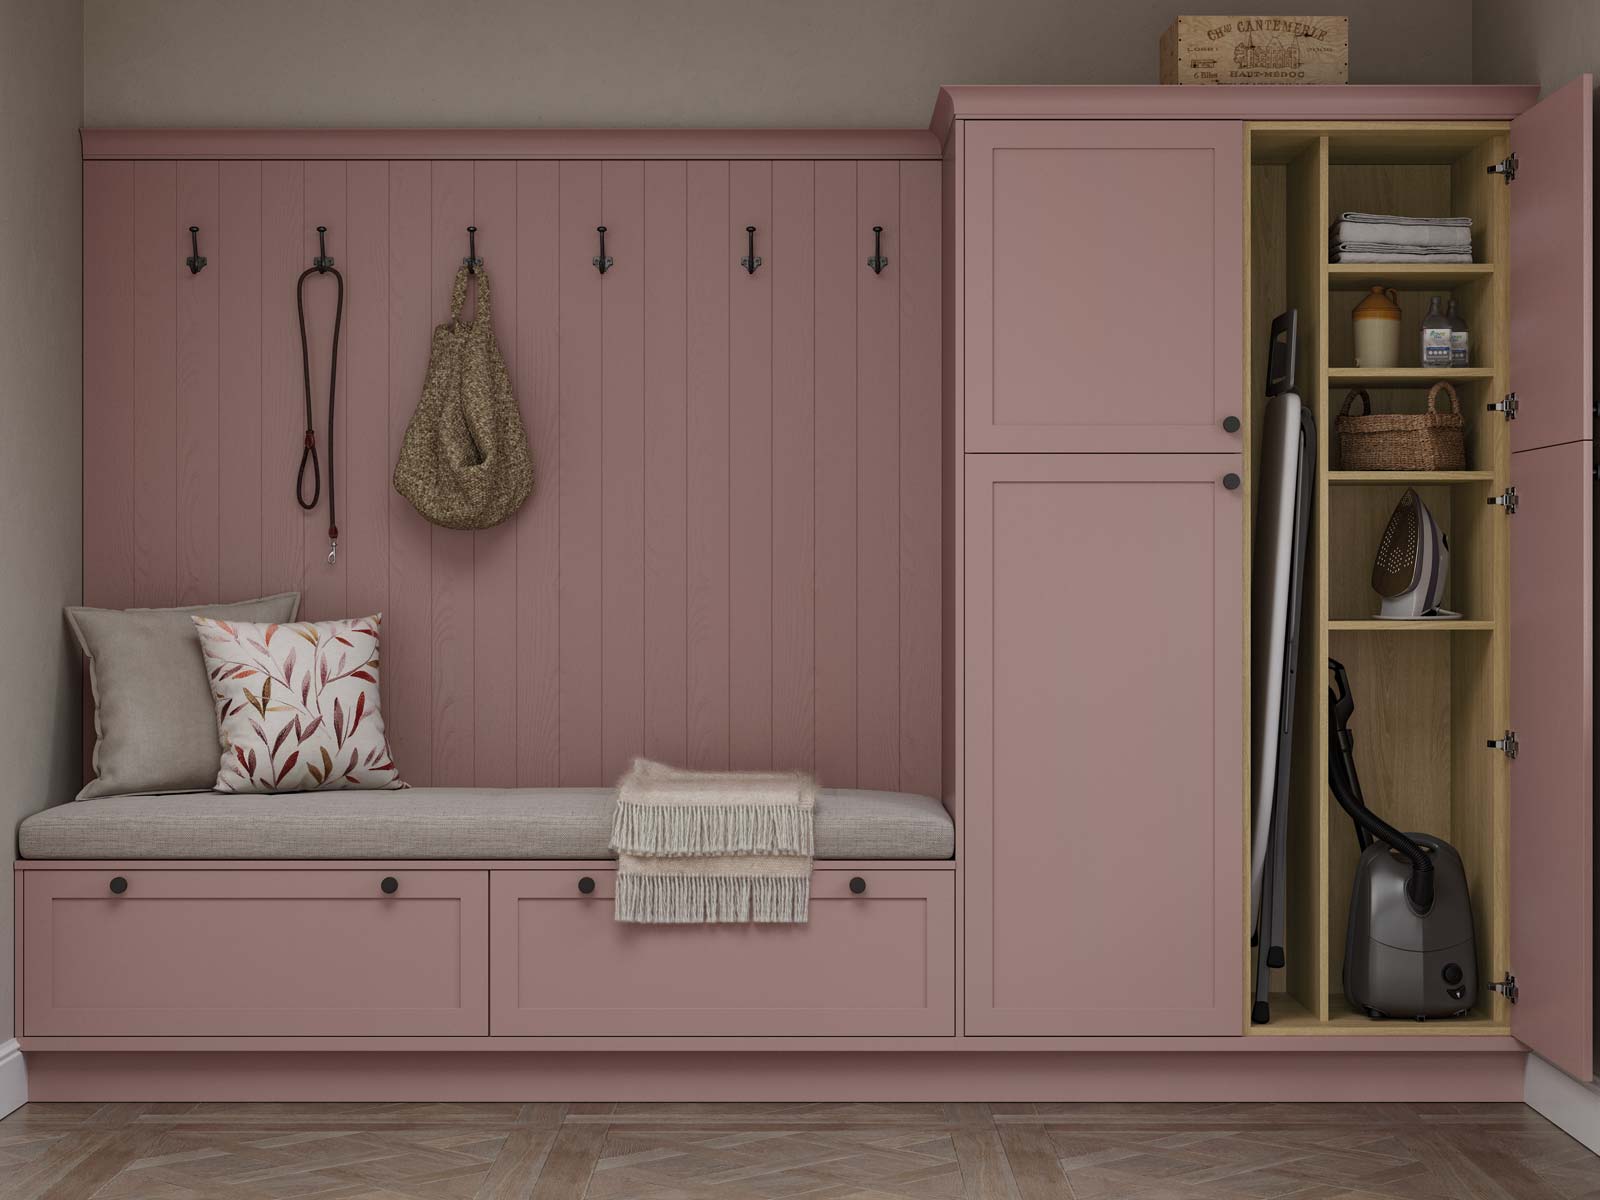 Boot room seat in pink and utility cupboard and hanging ironing board